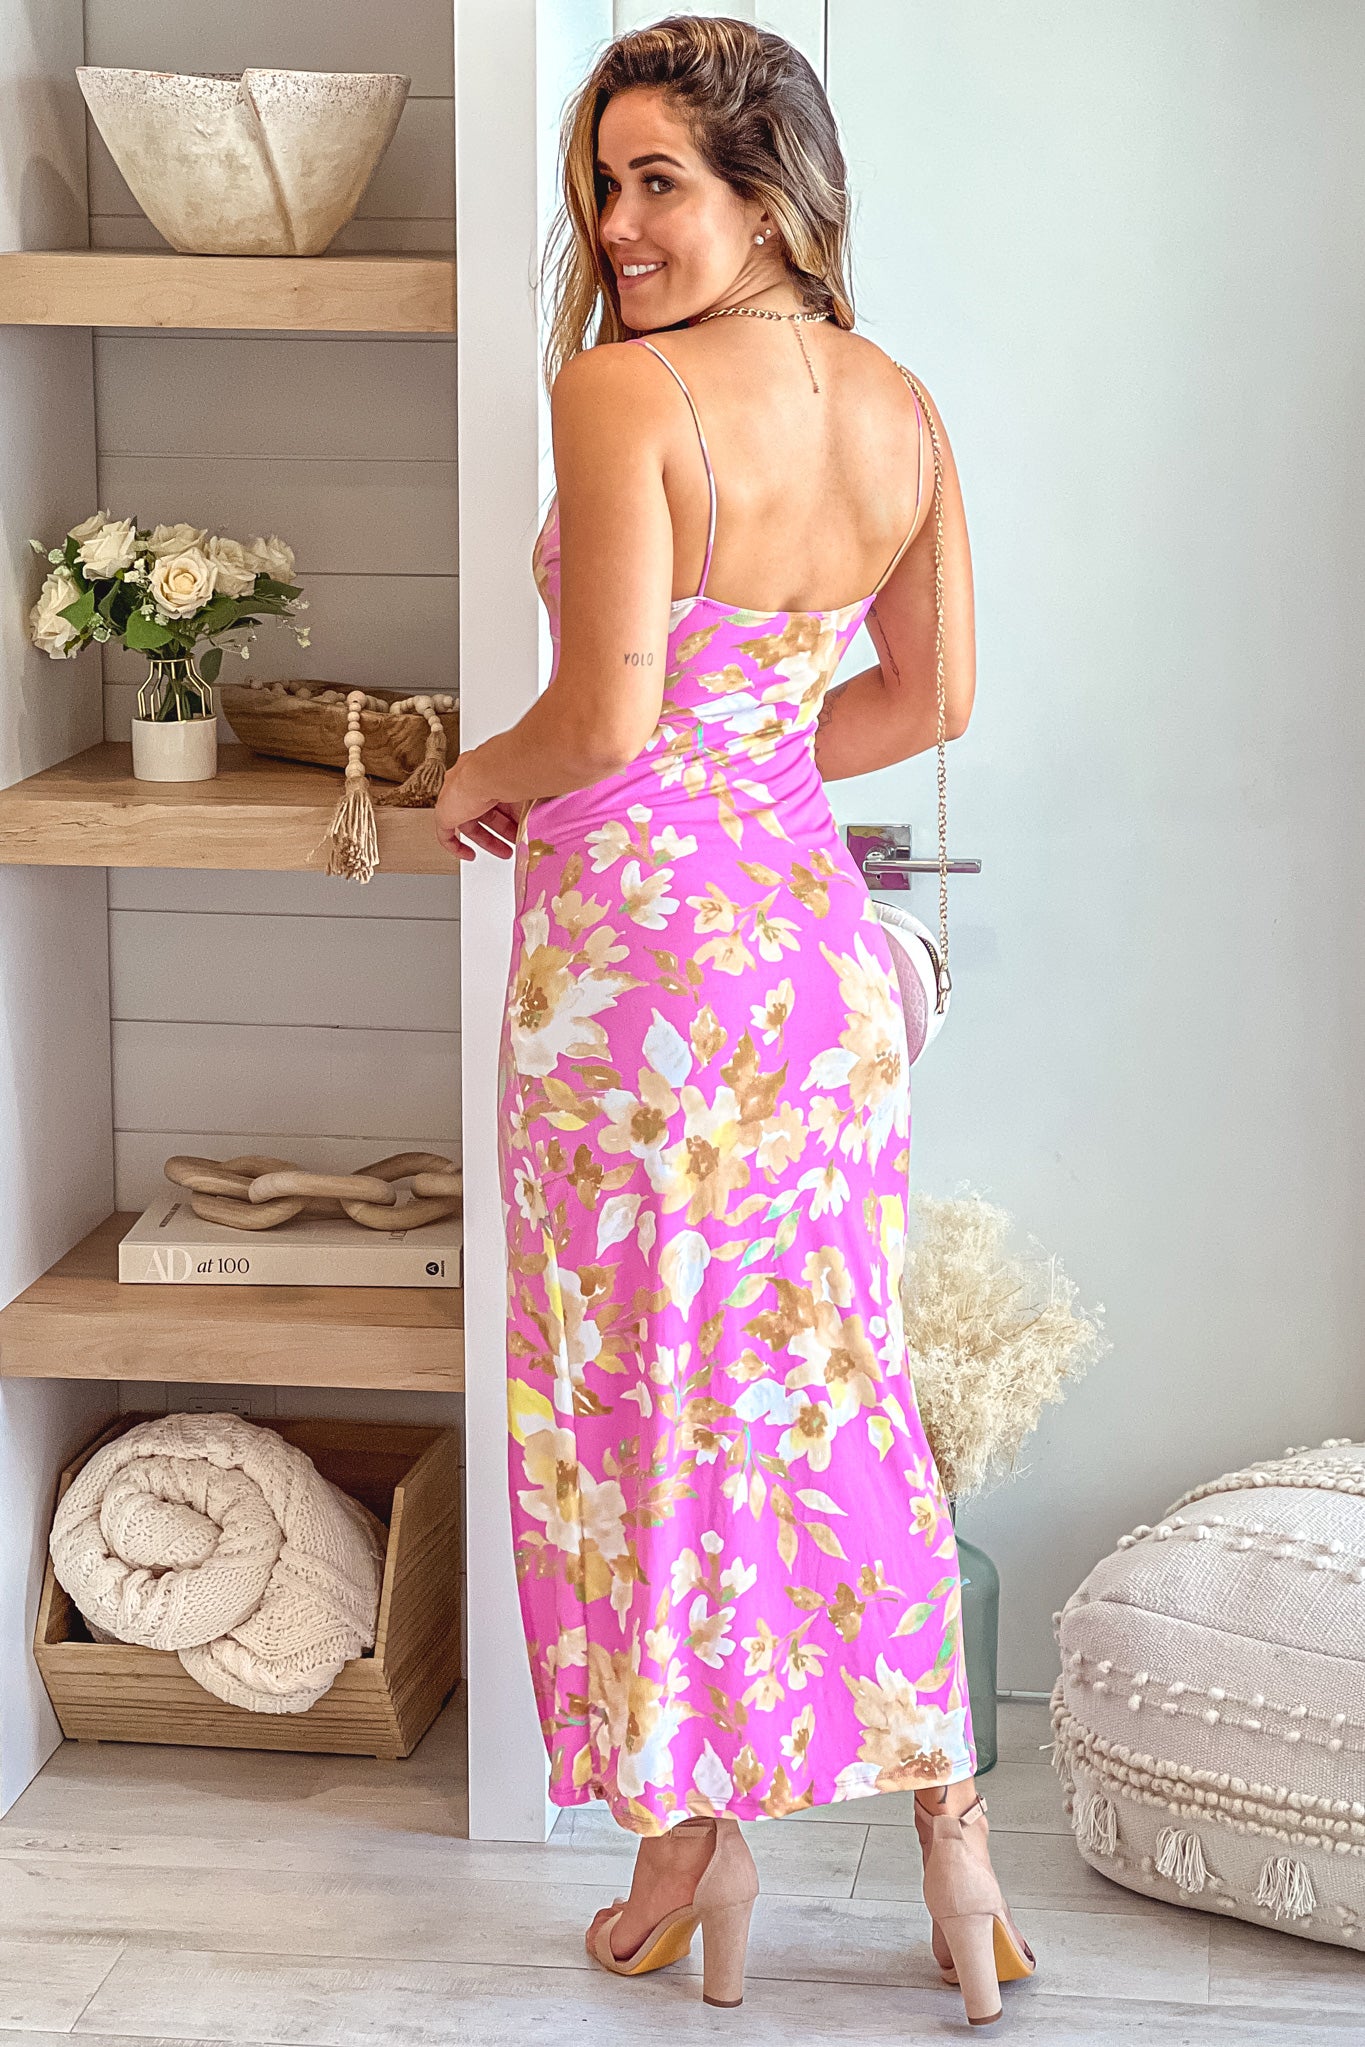 pink and yeallow floral dress